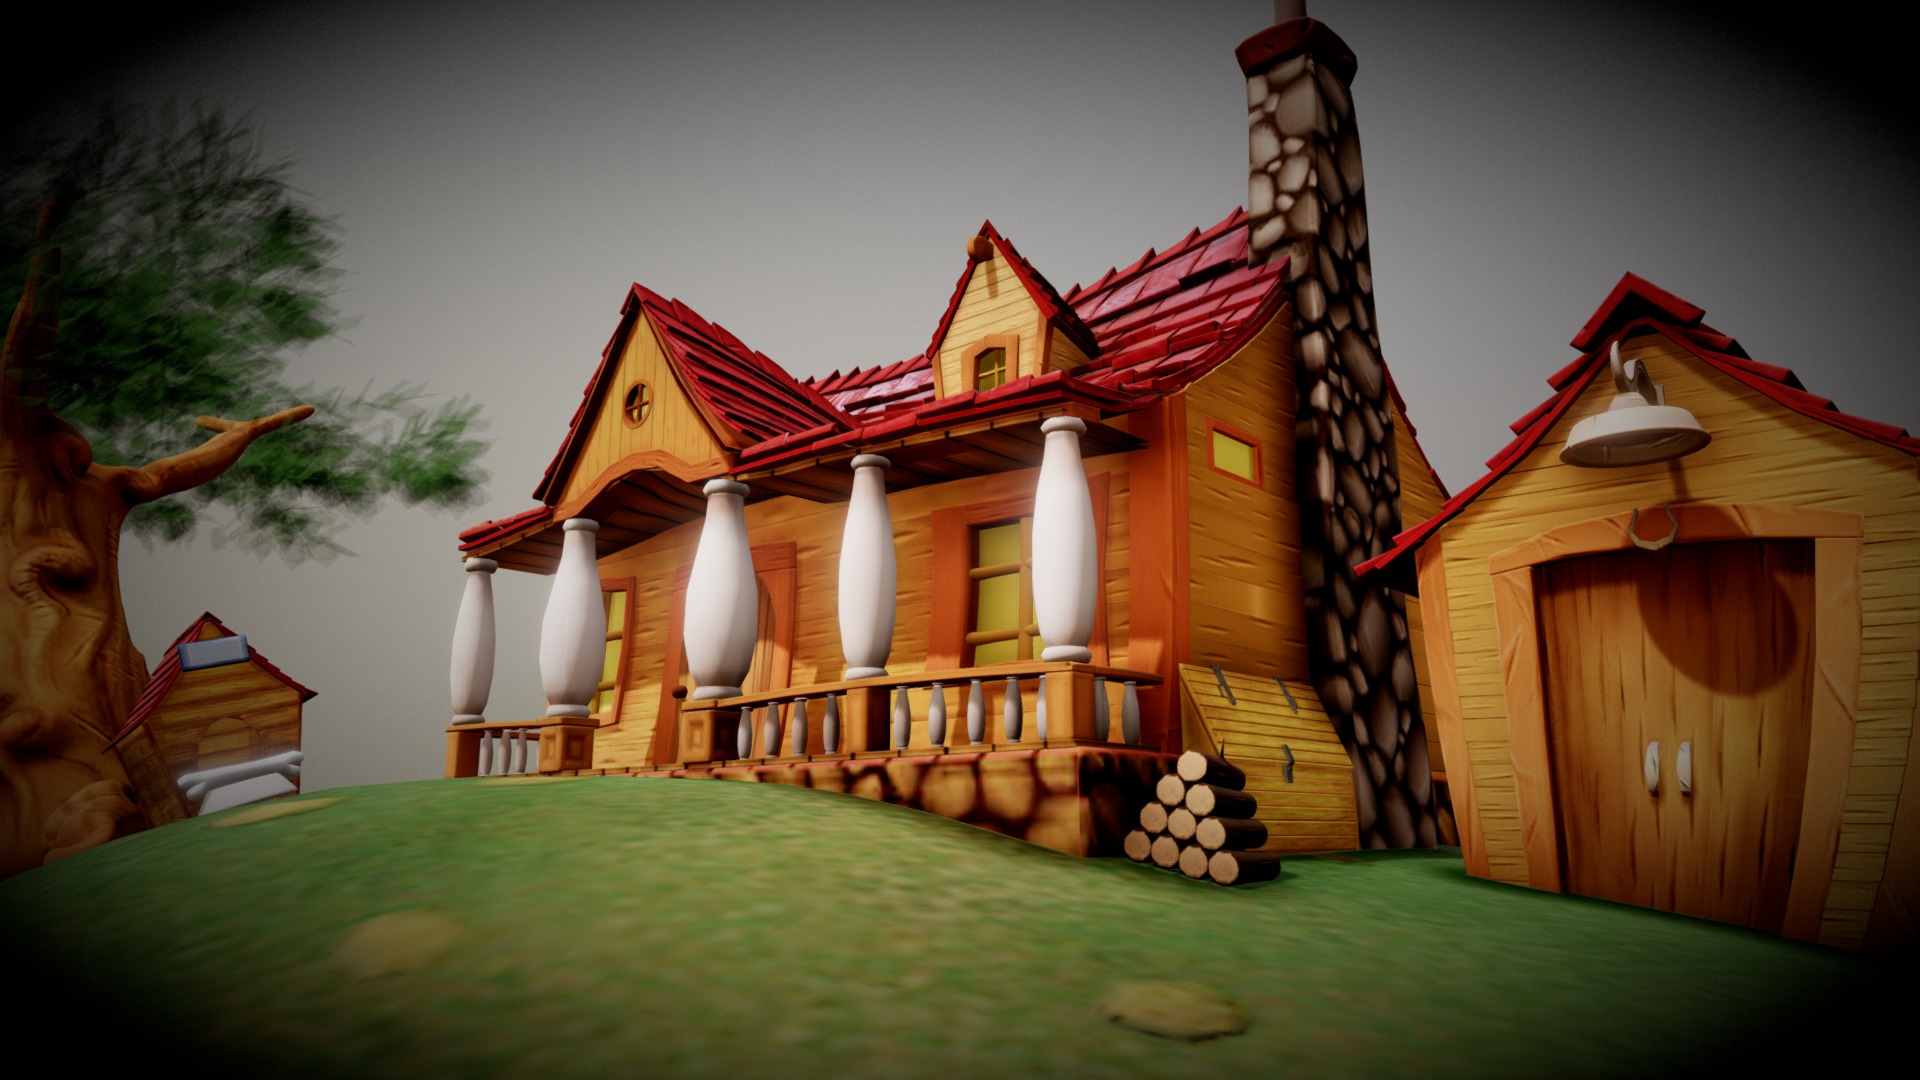 3D model Toon House - This is a 3D model of the Toon House. The 3D model is about a house with a tree and a yard.